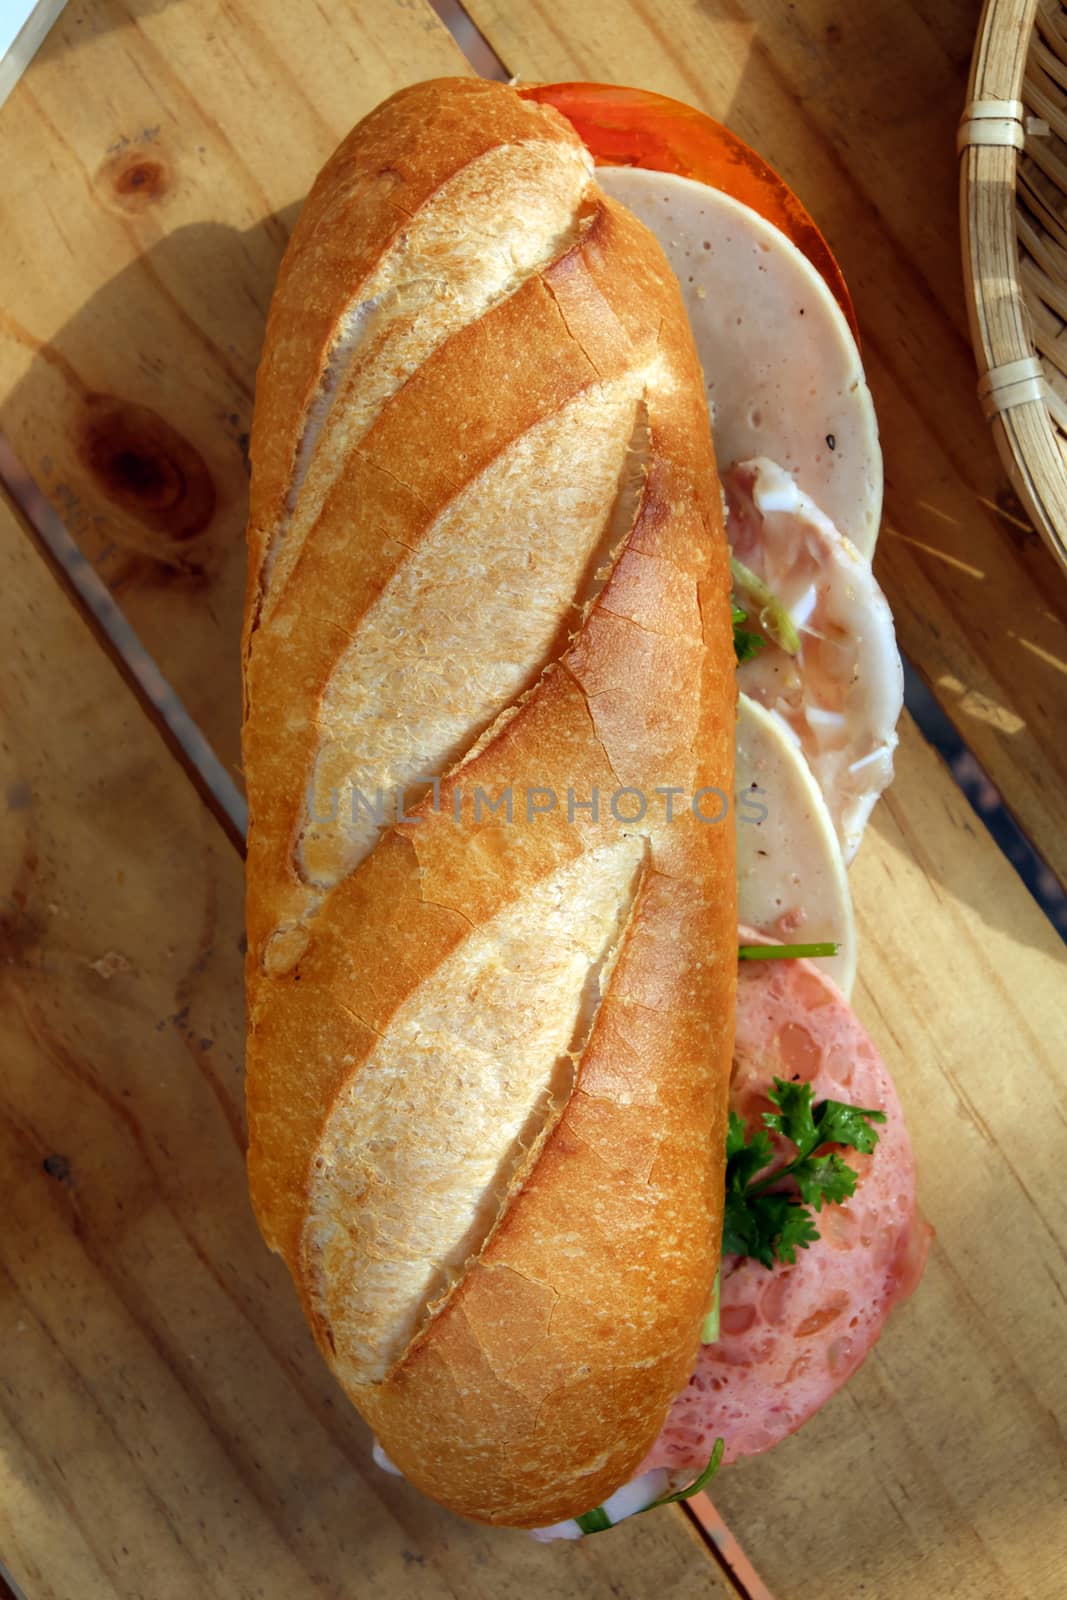 Vietnamese food, banh mi Viet Nam, a famous eating for morning with tasty and convenient for modern life, bread on table for breakfast as fast food product in Vietnam